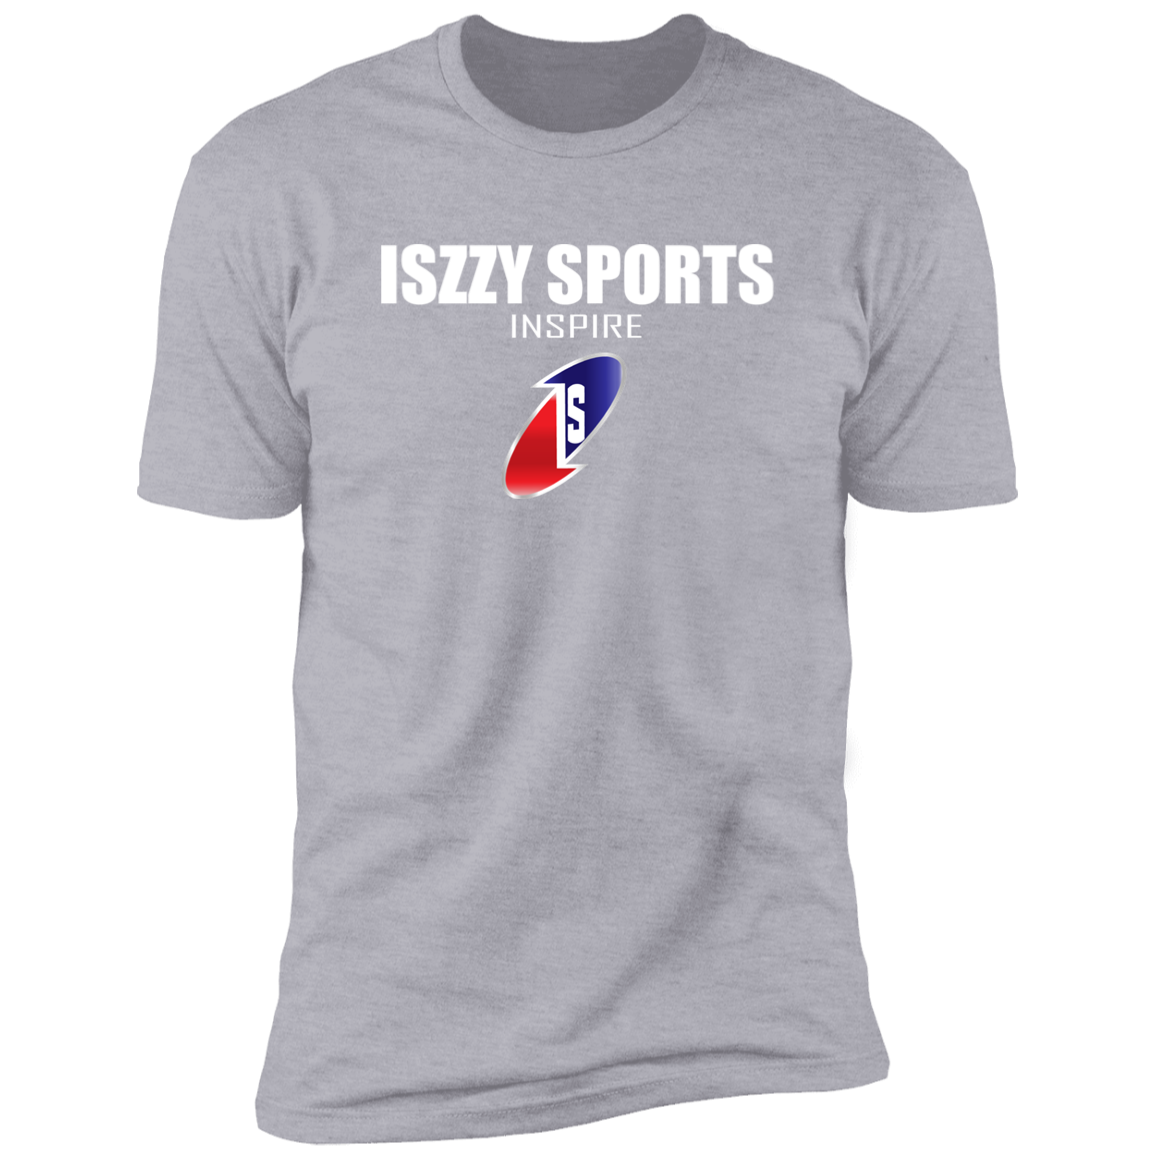 Iszzy Sports shirt (Inspire)